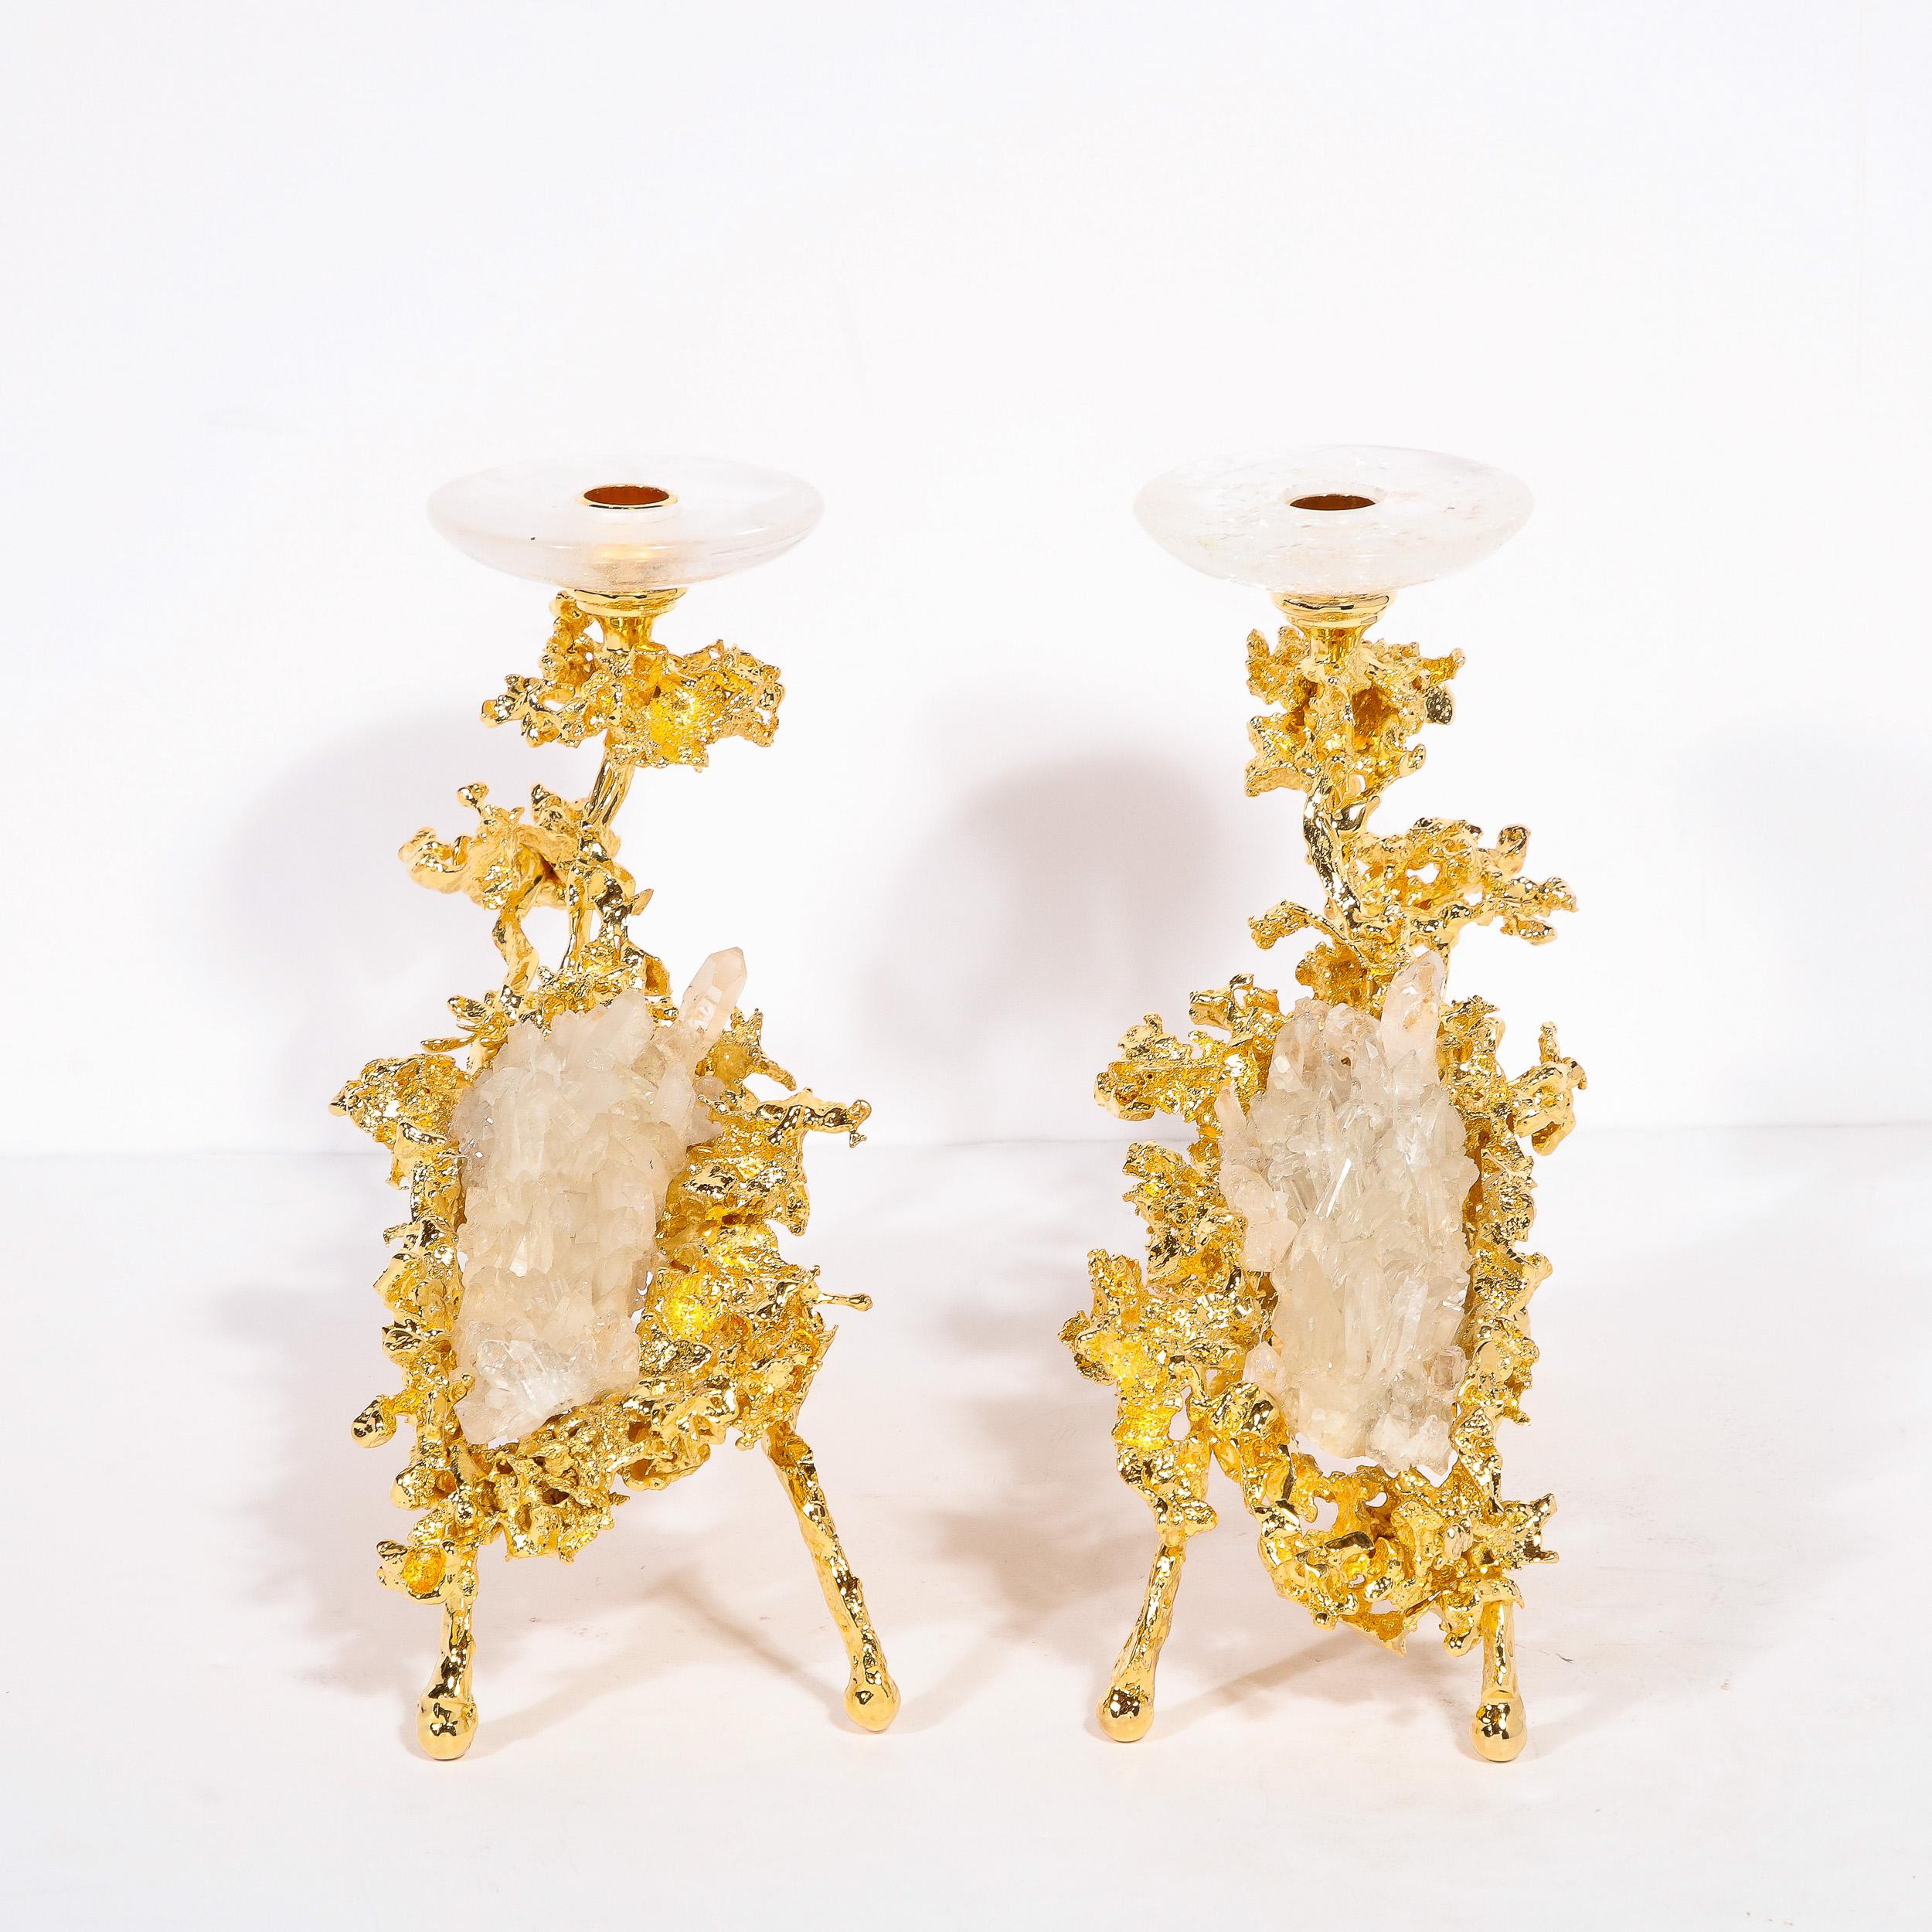 20th Century Pair of 24Karat Gold Low Branch Candleholders w/ Rock Crystals by Claude Boeltz For Sale